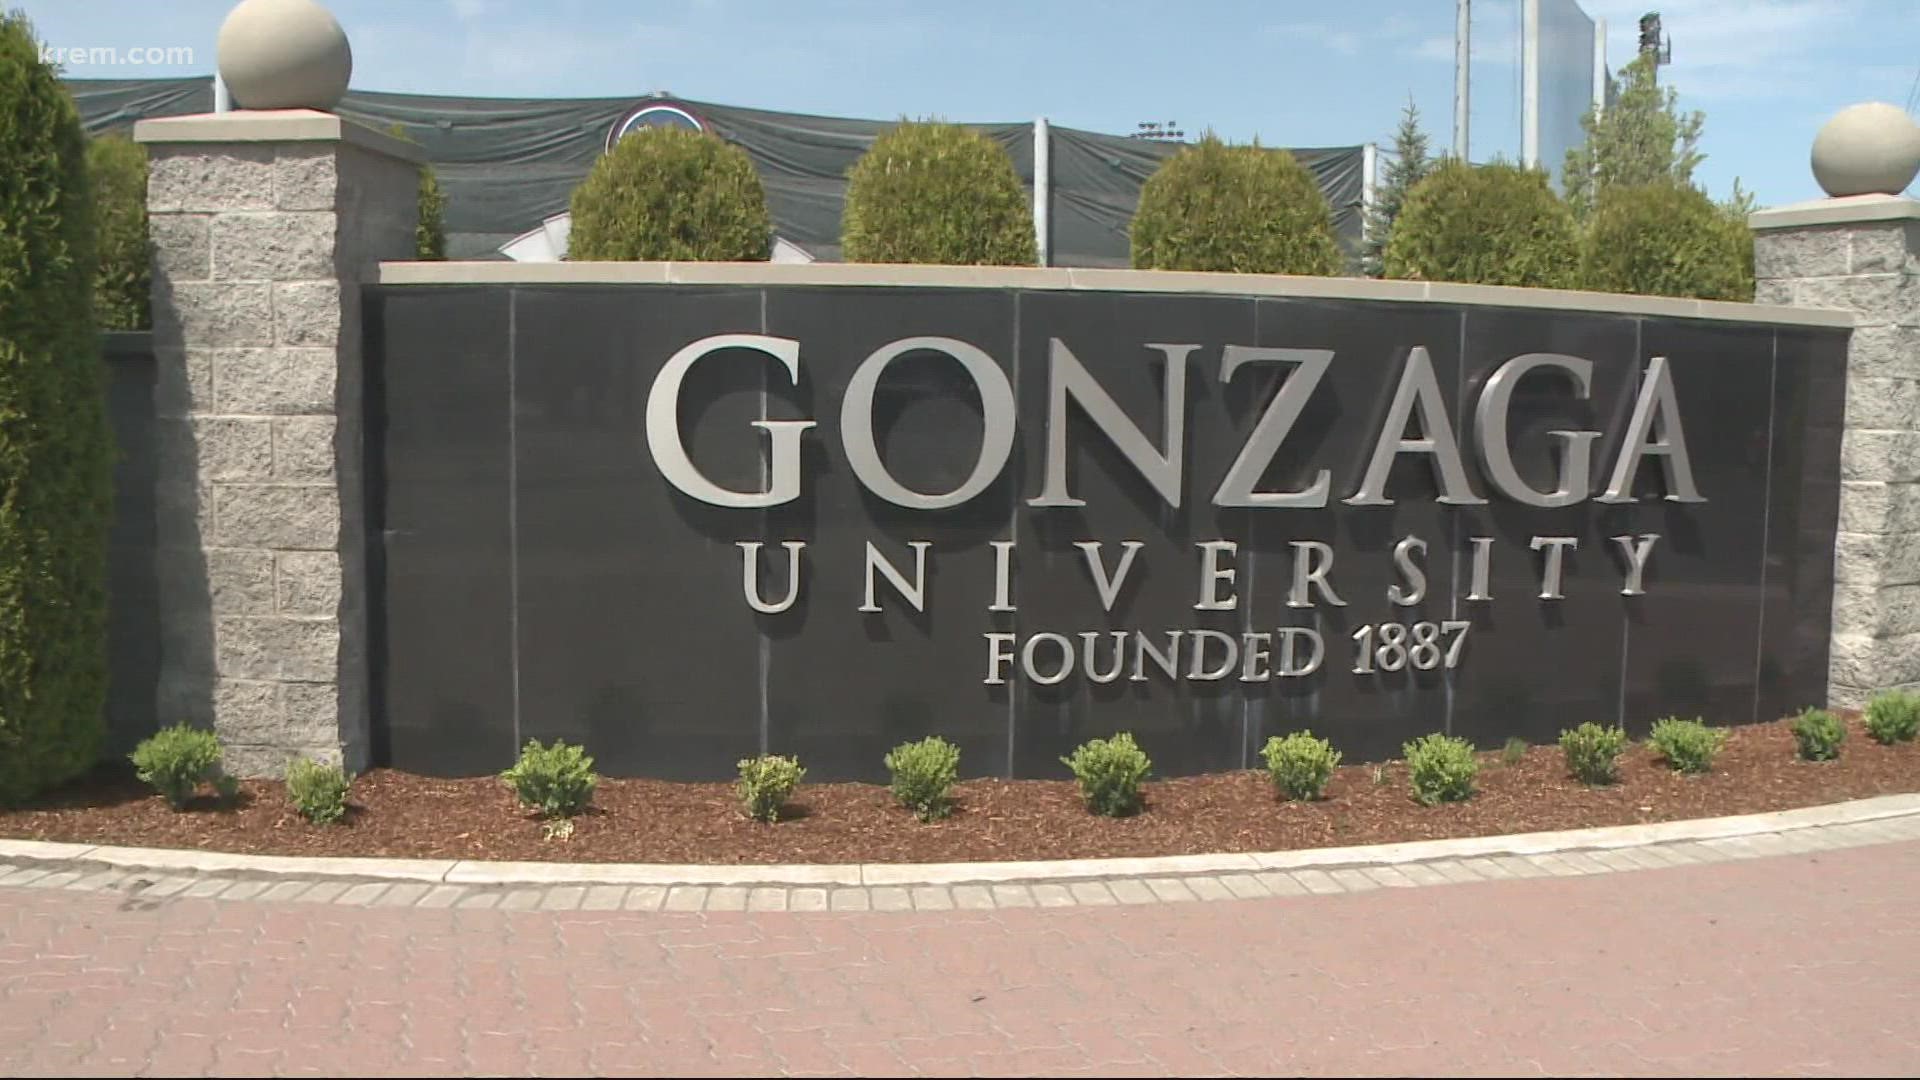 After a man entered a Gonzaga class and used profane language, the university is reassessing it's security measures said Gonzaga officials.